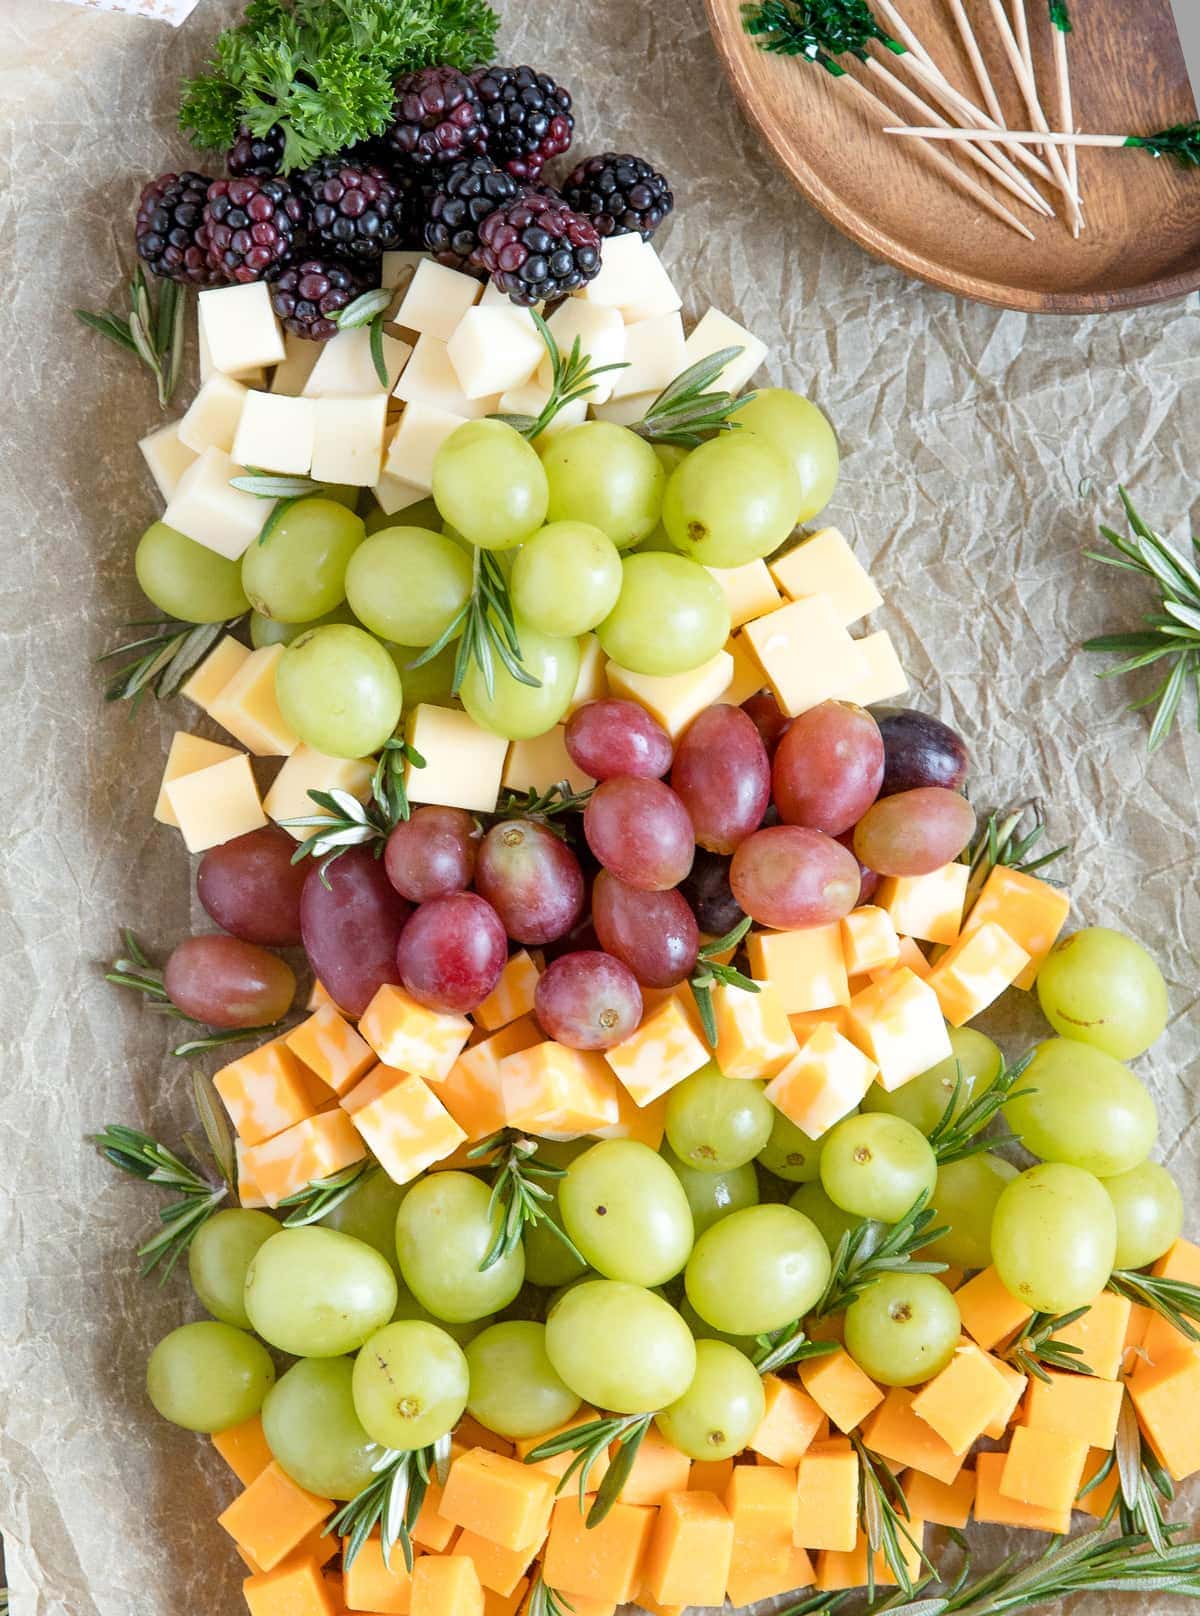 Cheese Fruit Tray Ideas | vlr.eng.br